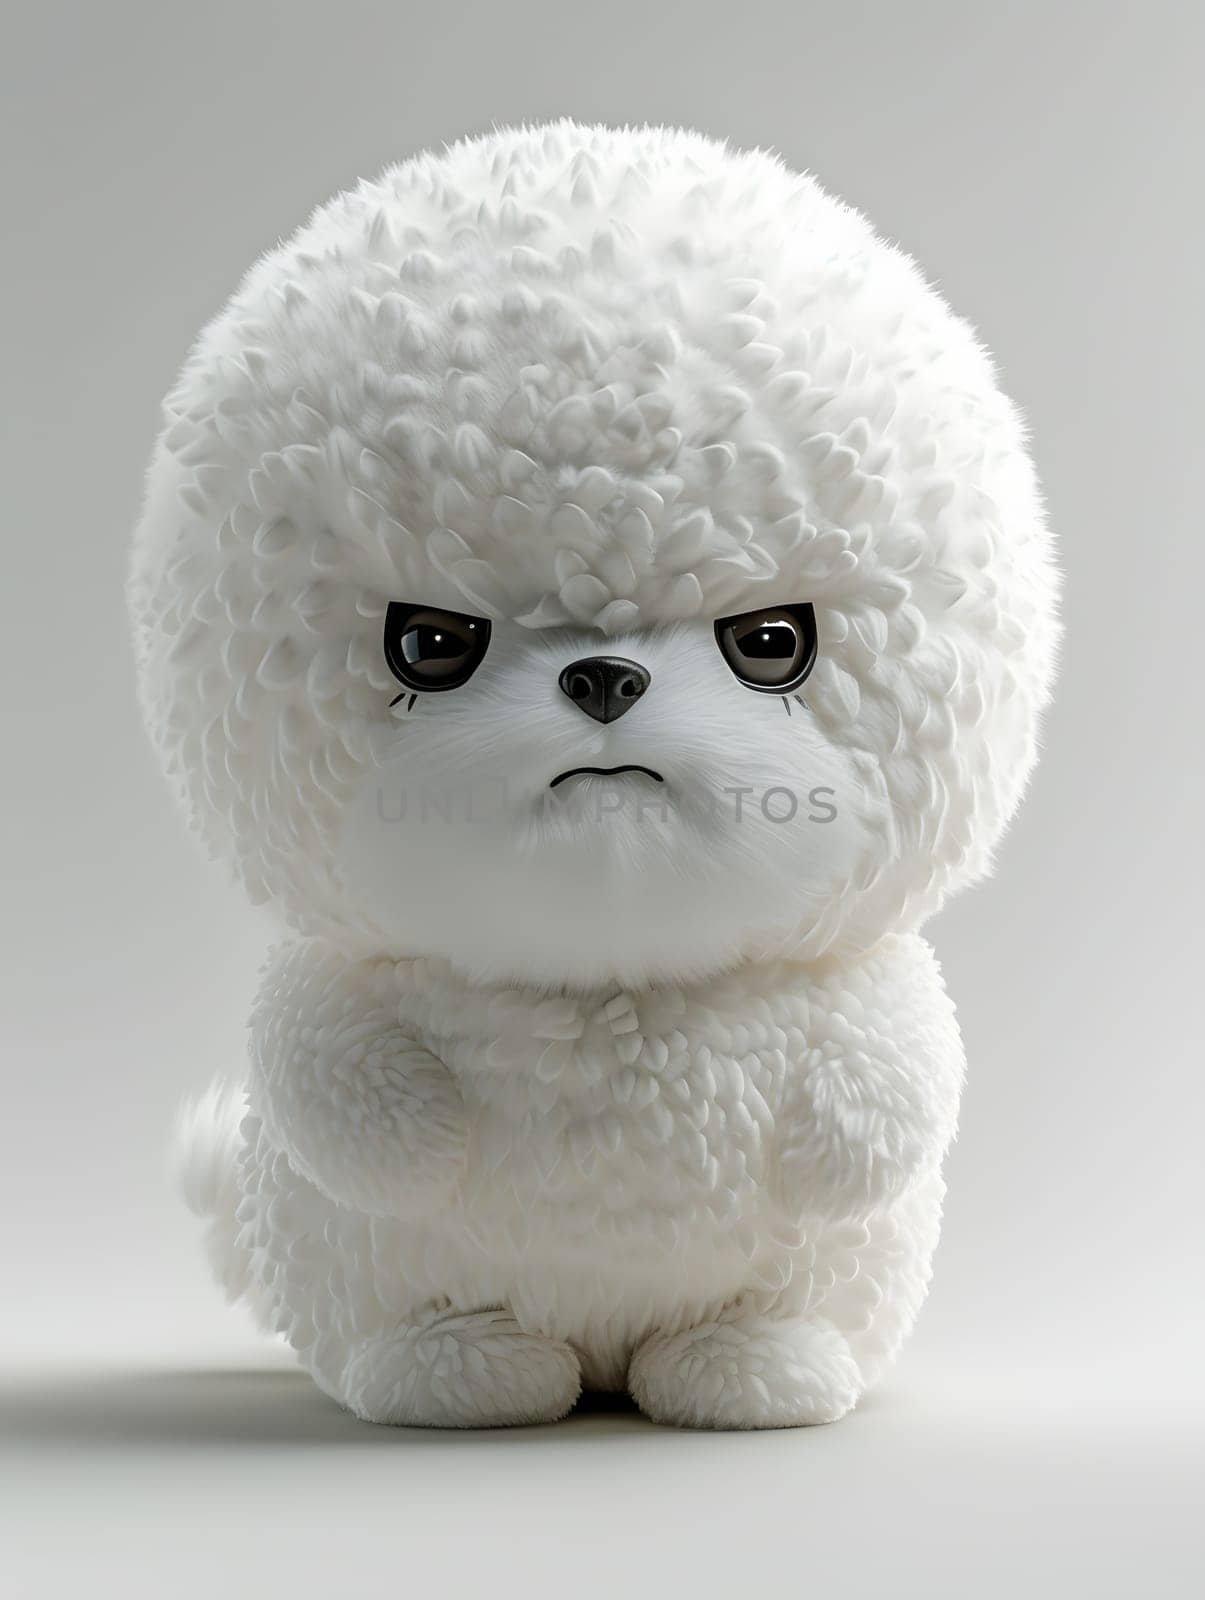 An angryfaced white stuffed toy dog sits on a white surface by Nadtochiy